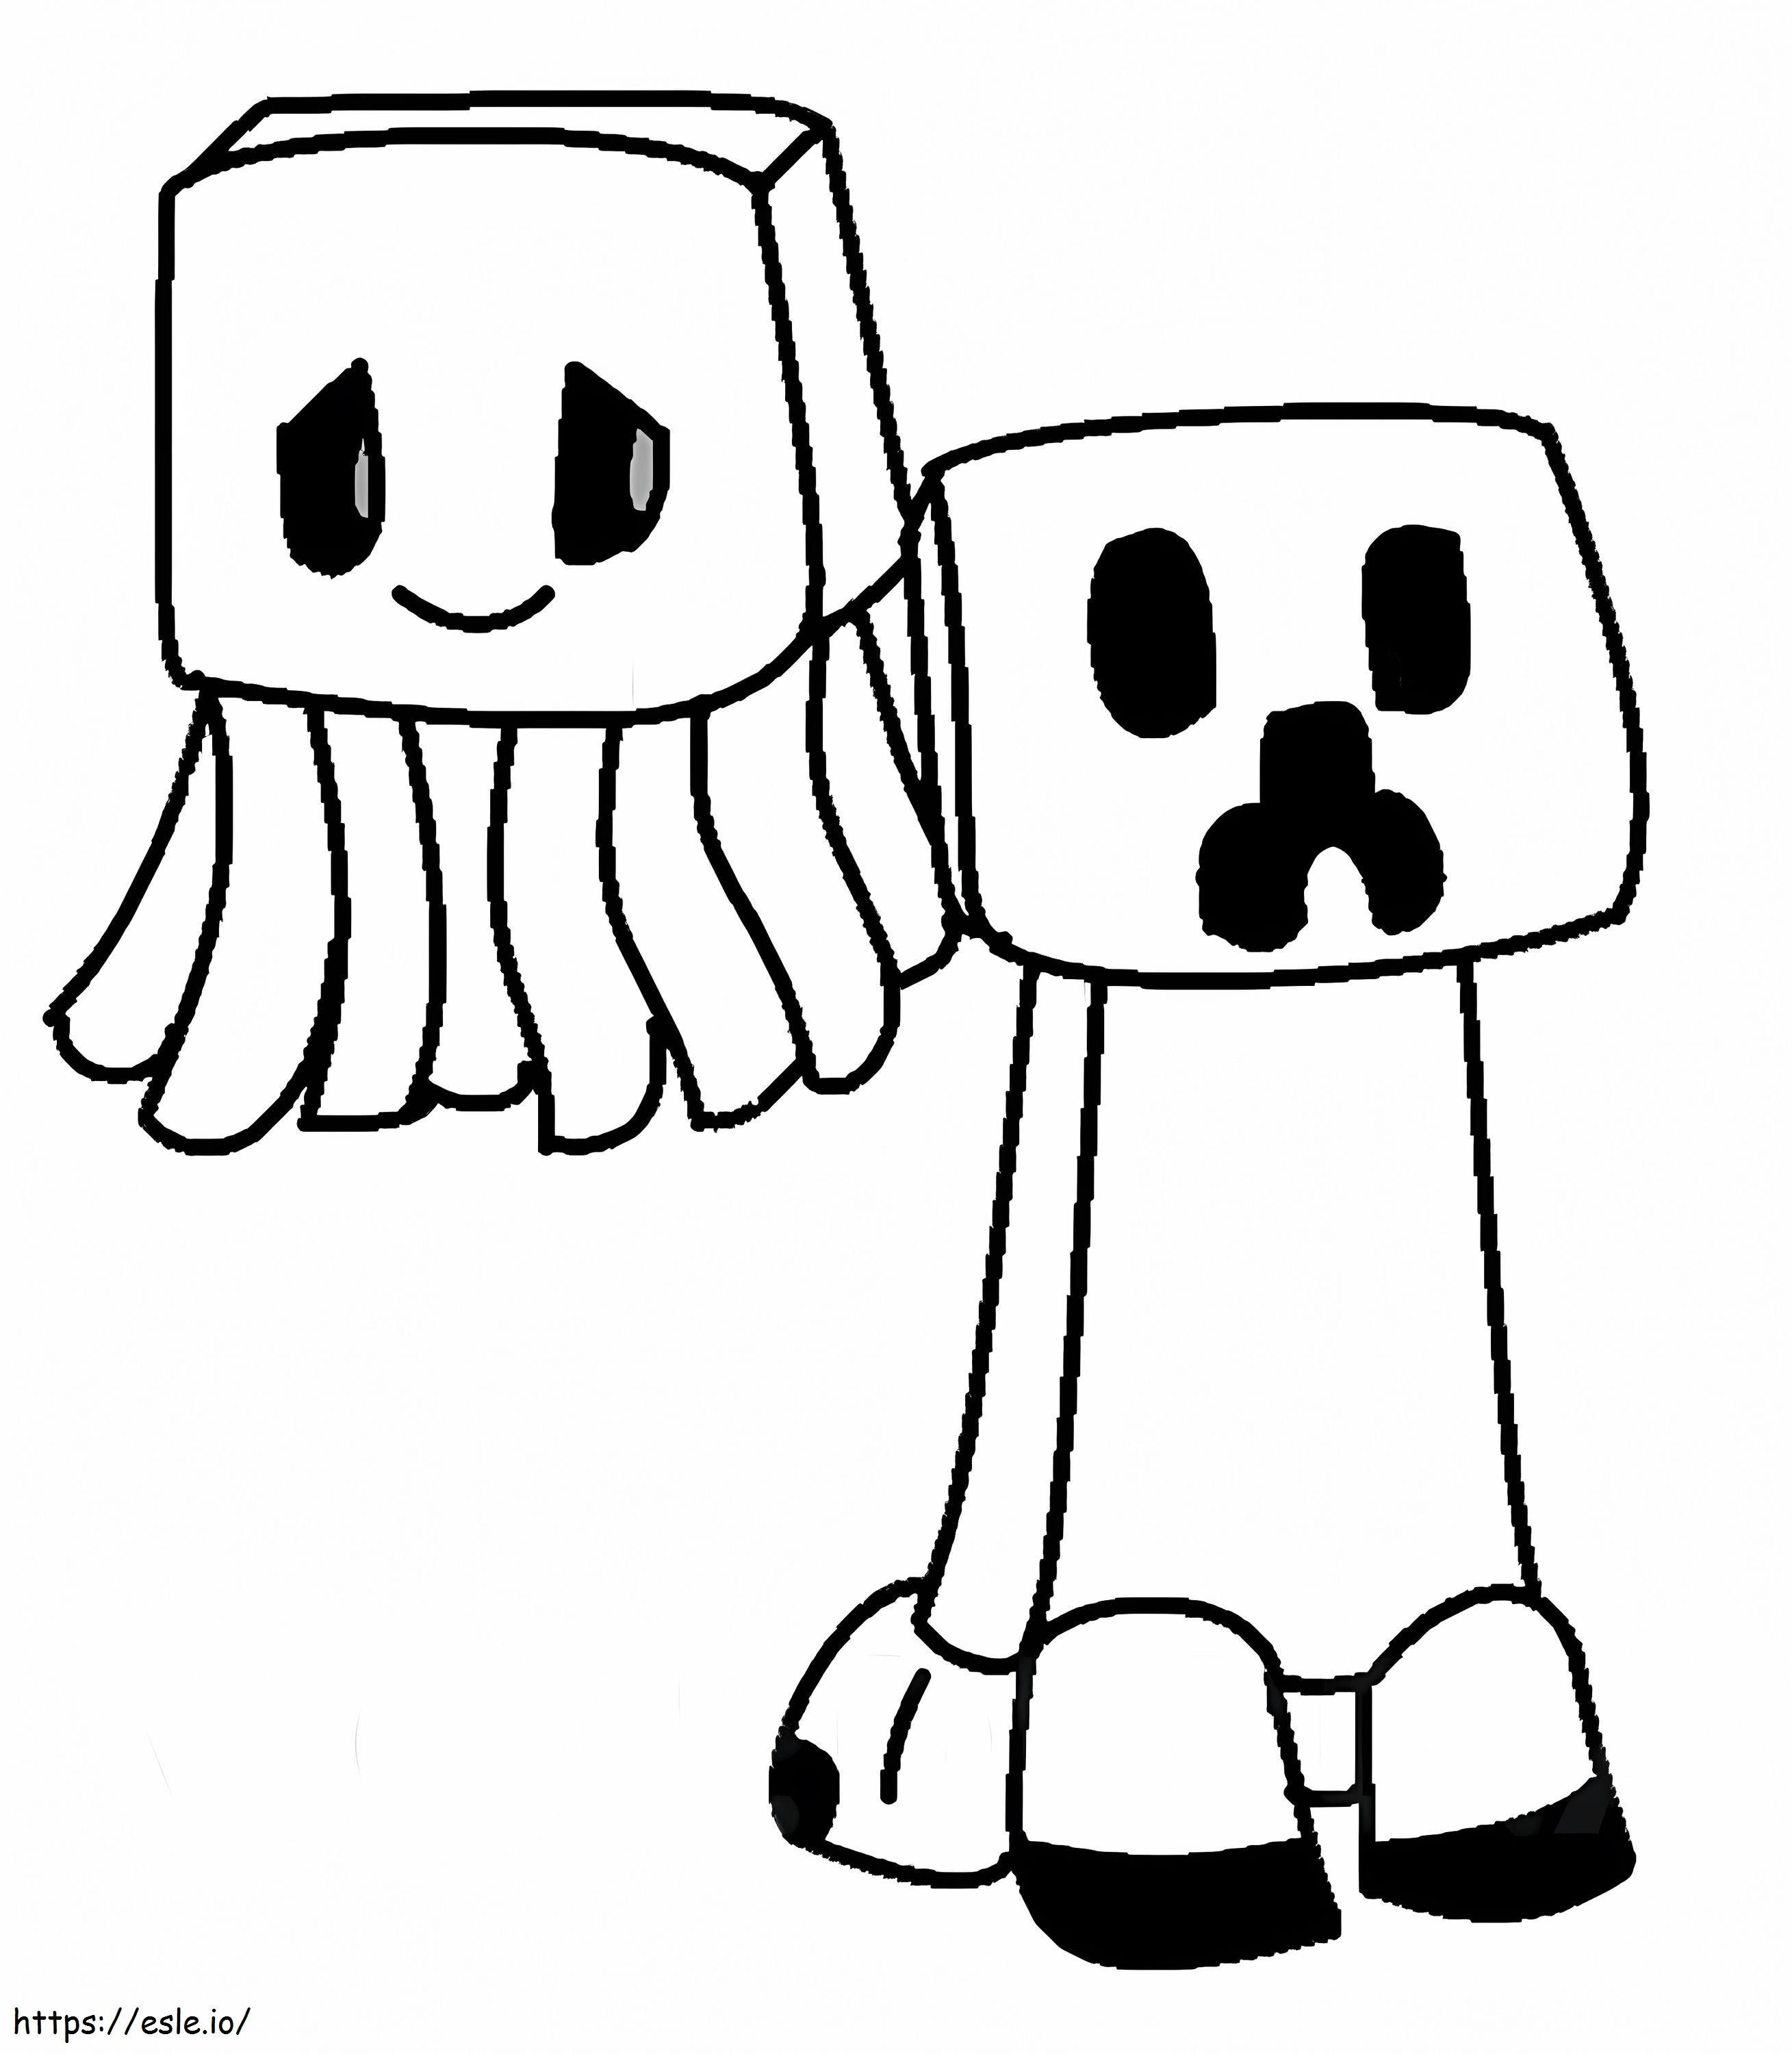 Cute Minecraft Creeper And Ghast coloring page